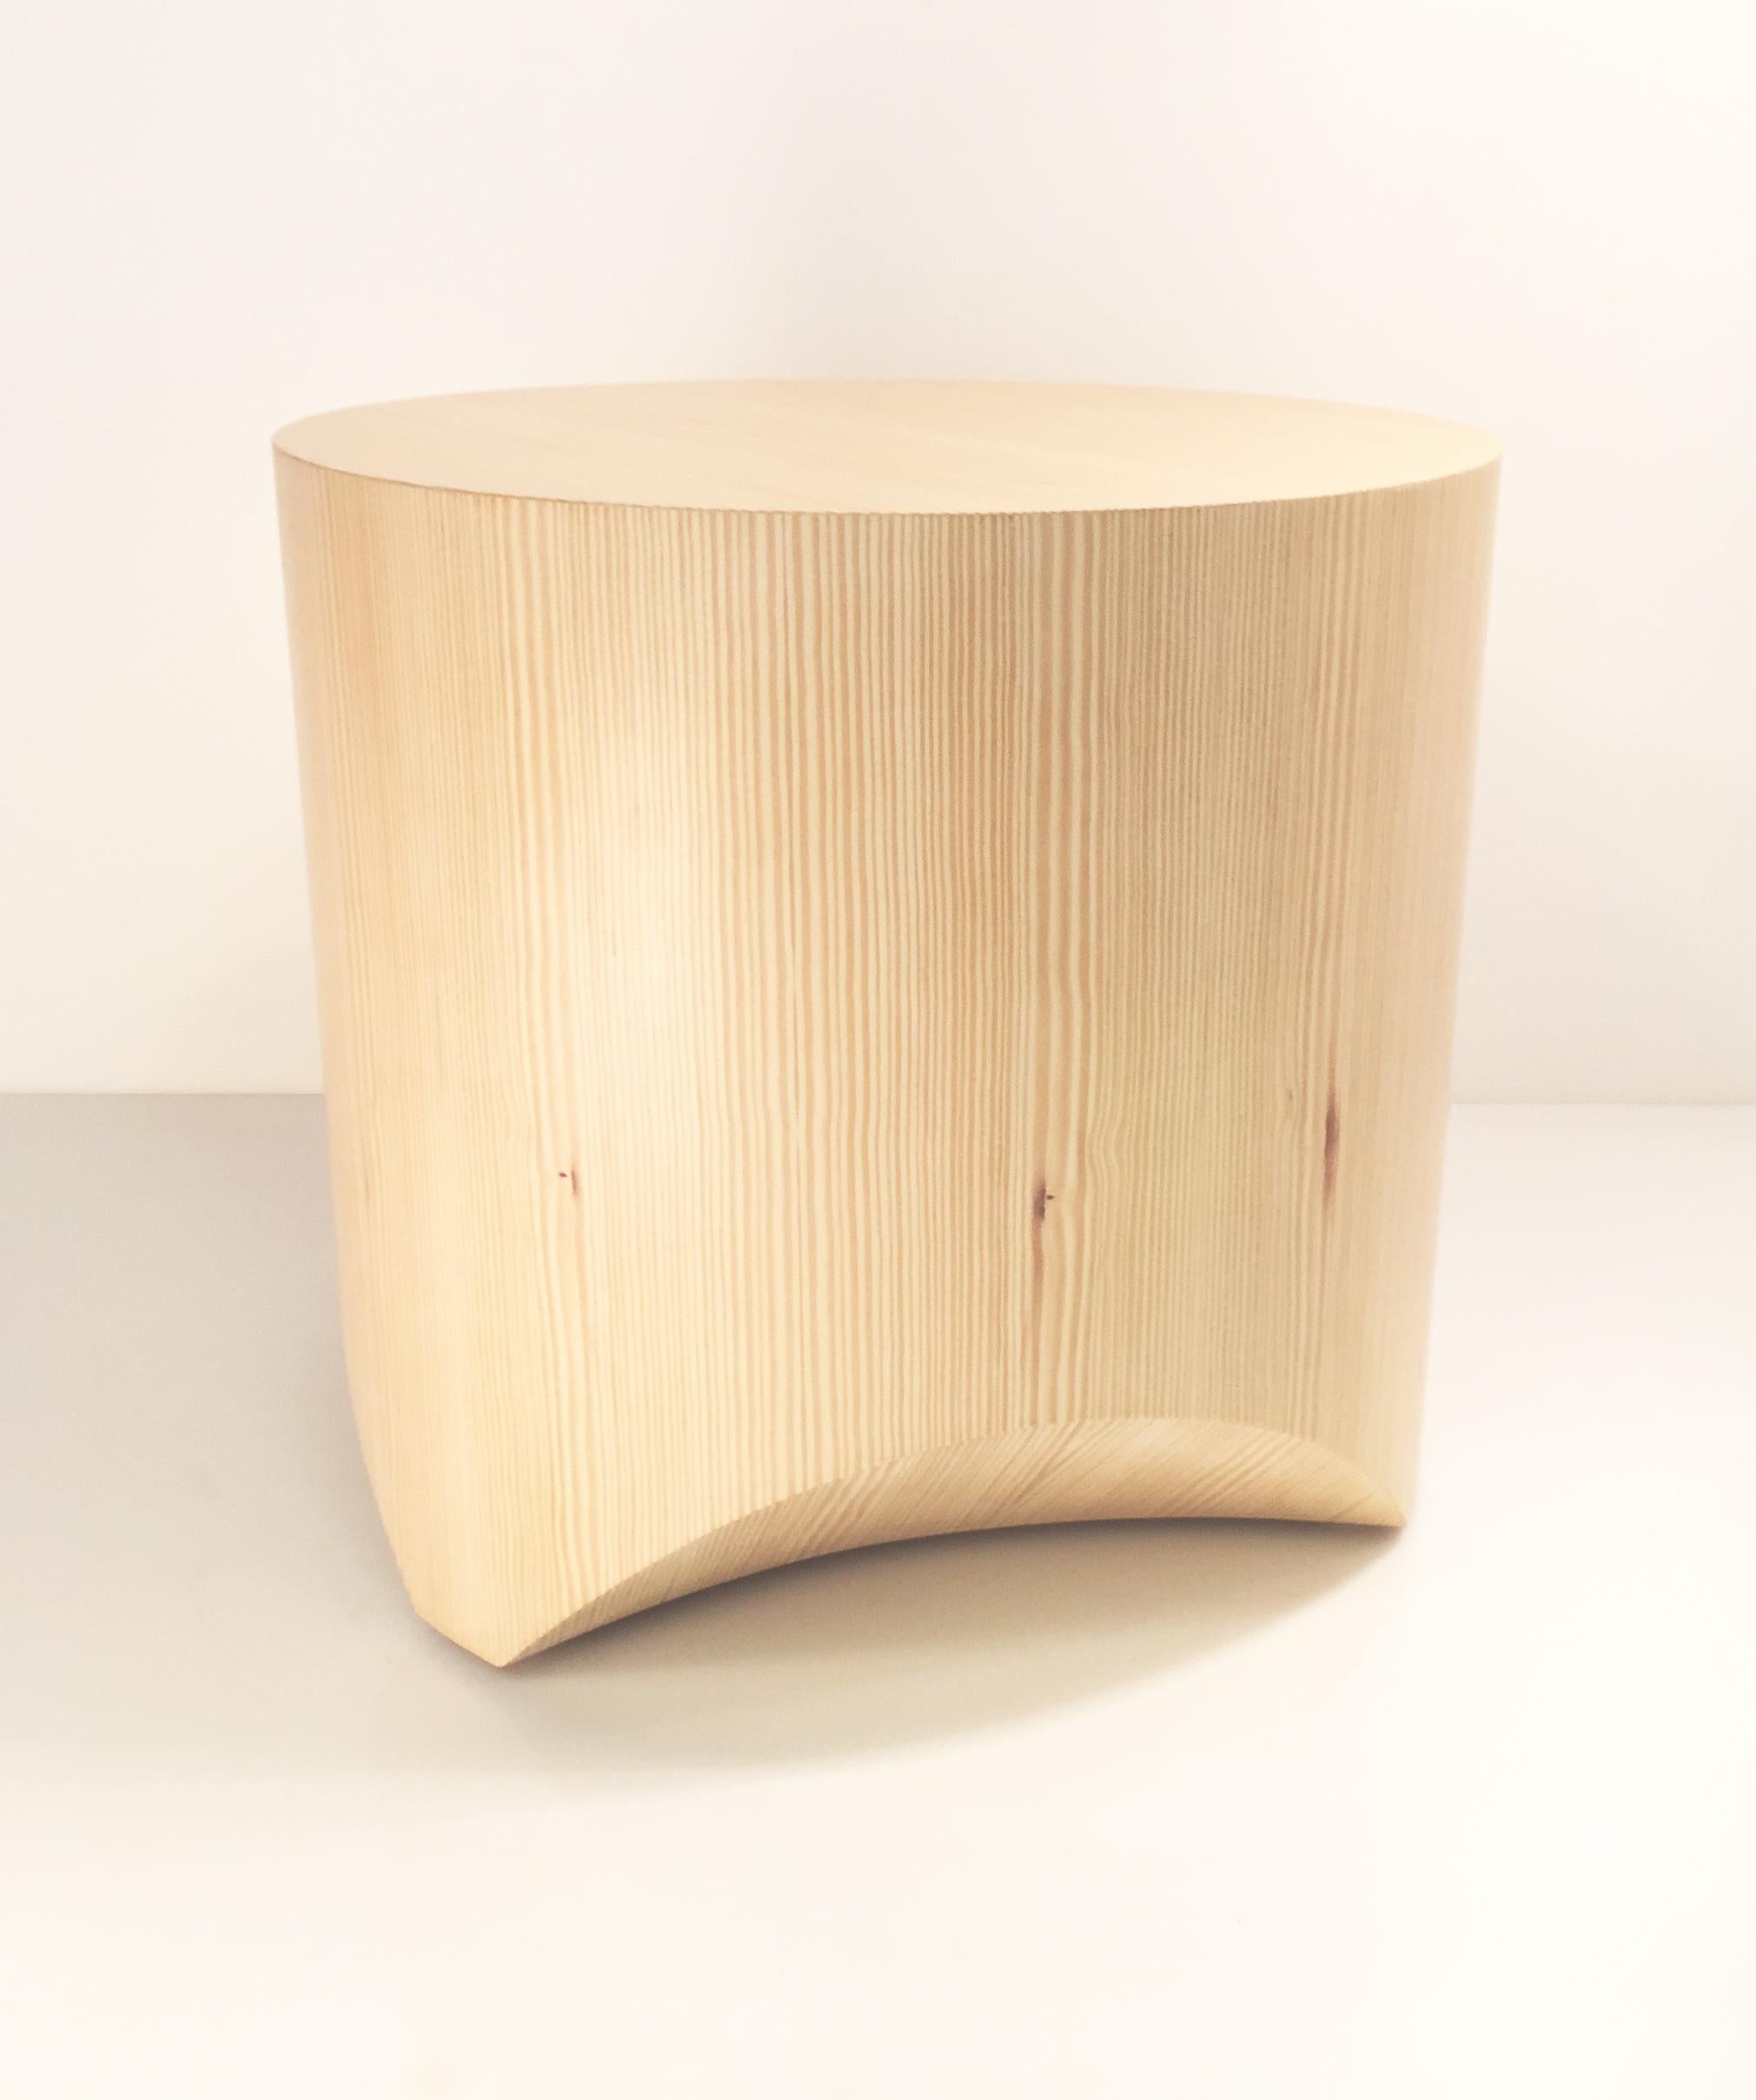 American Stool from the 